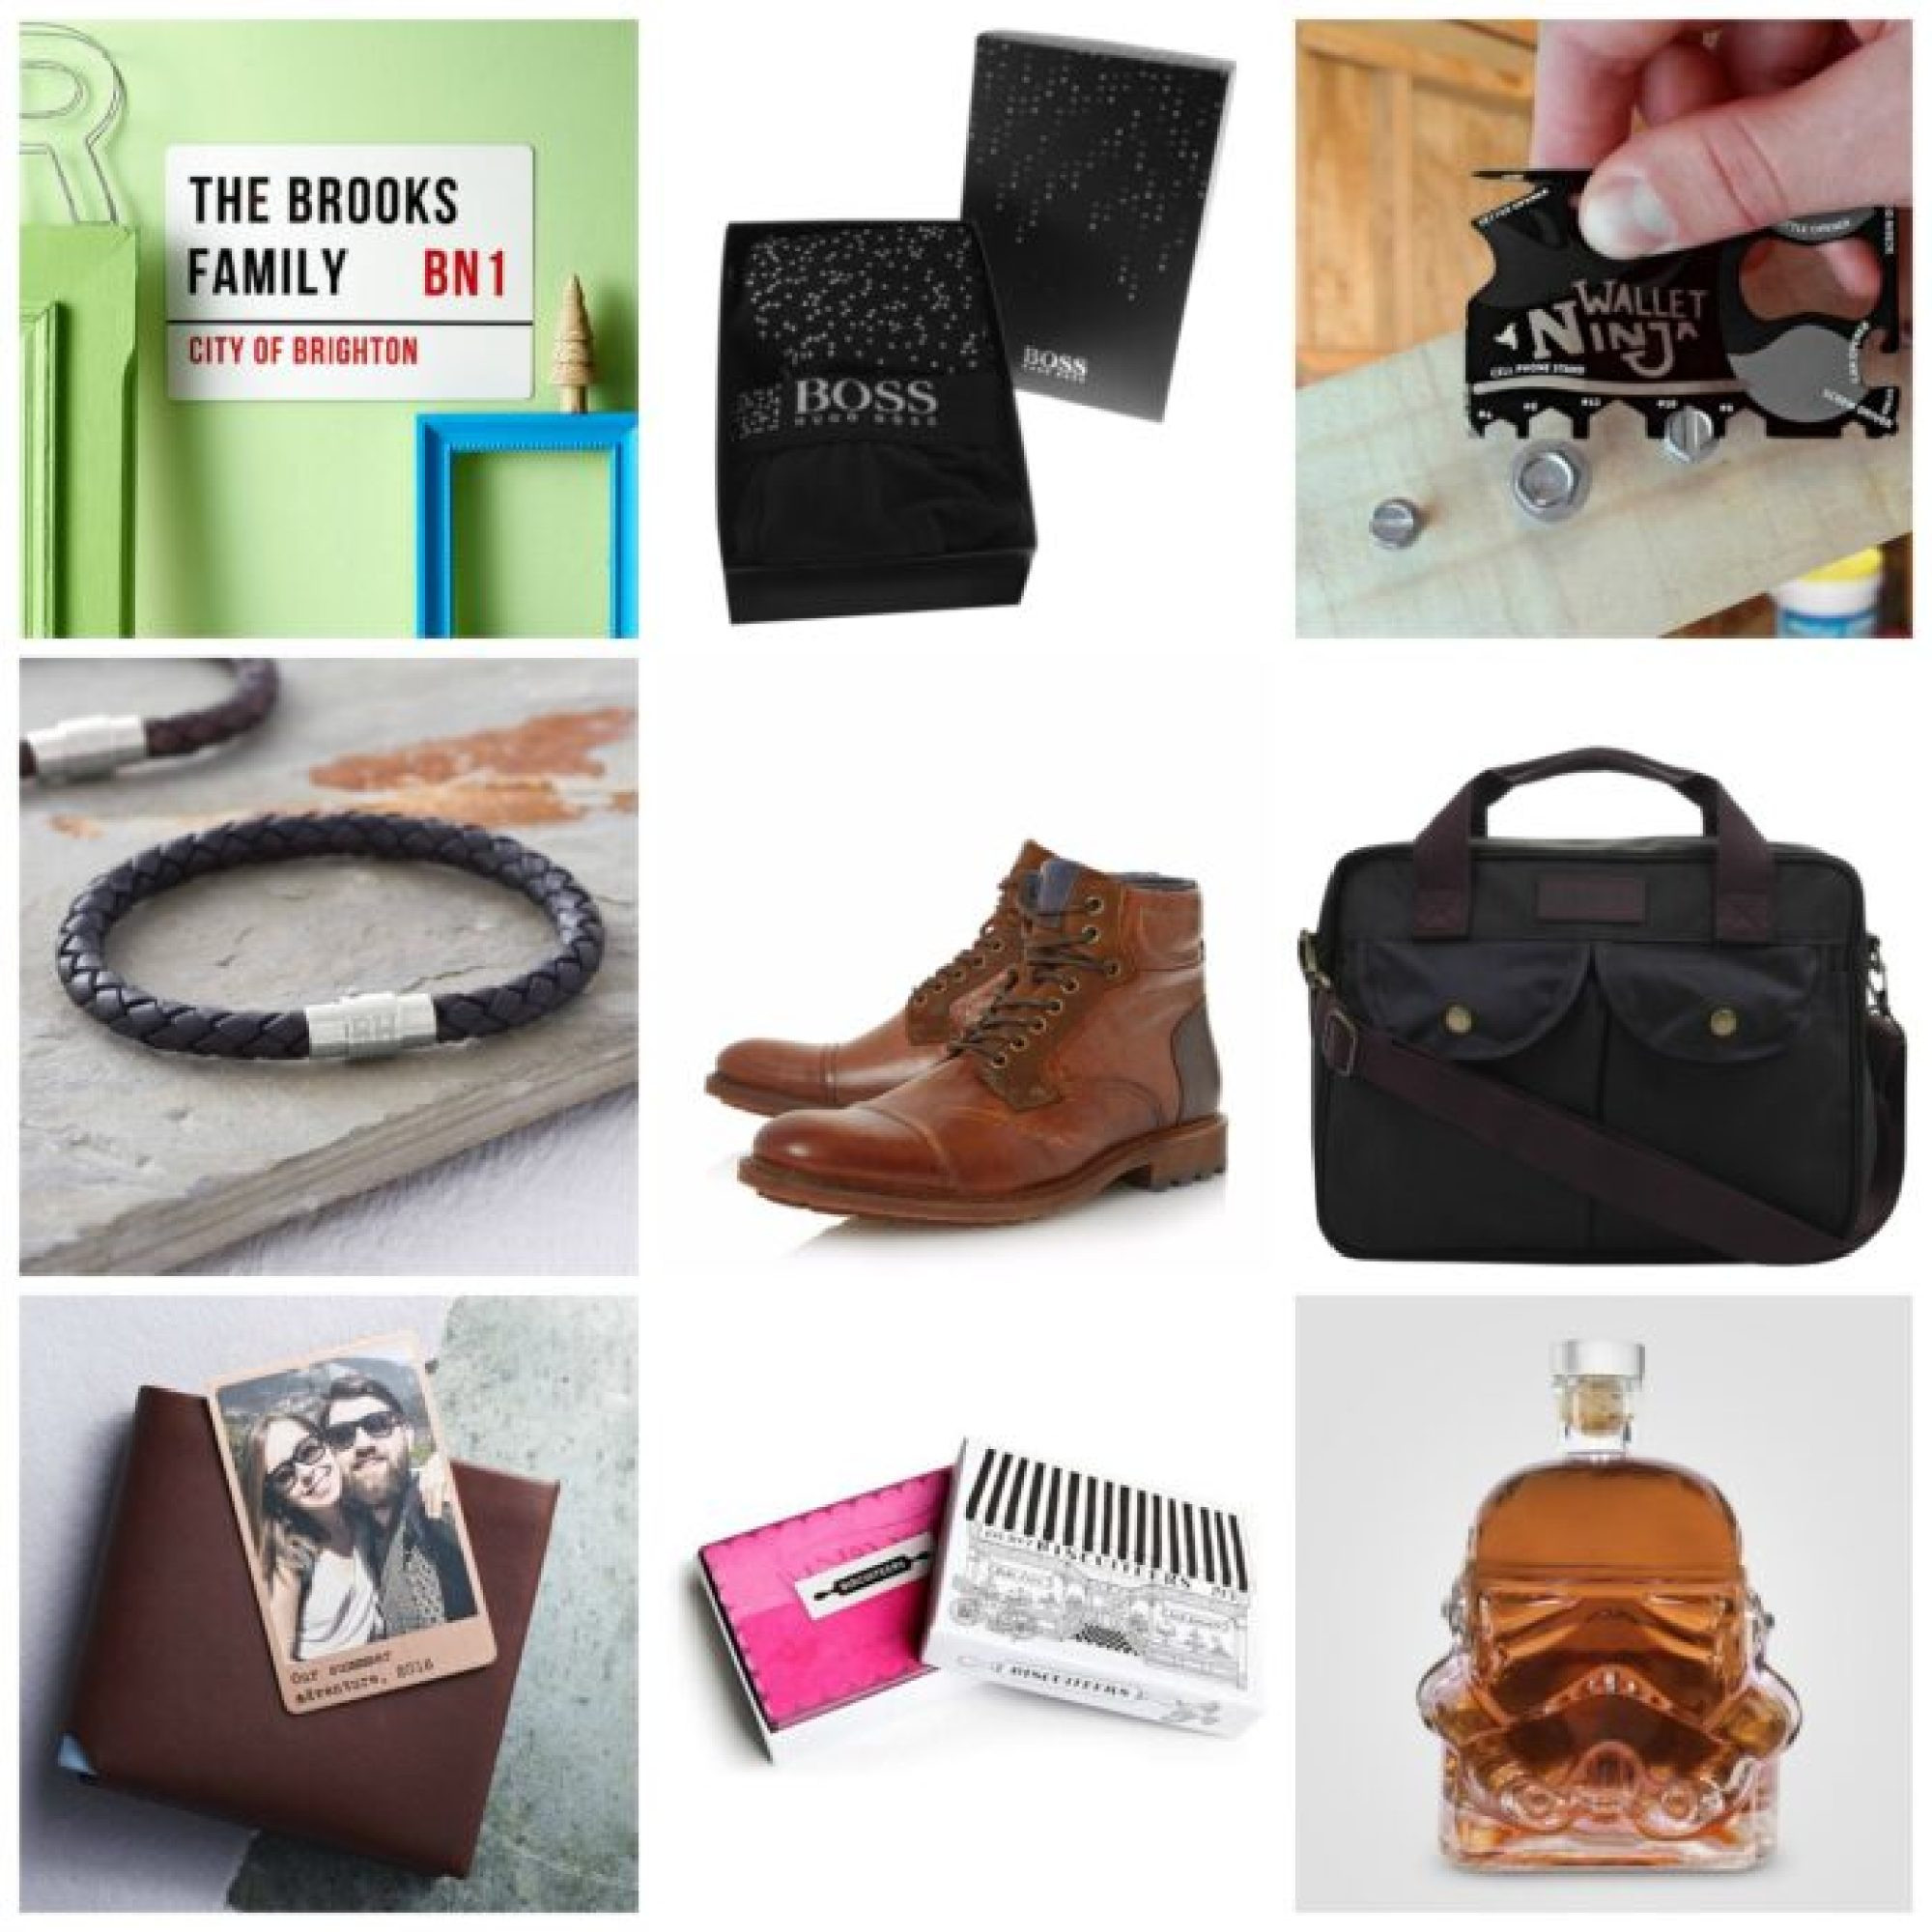 Manly Valentine Gift Ideas
 Valentines Day Gift Ideas for the man in your life Super